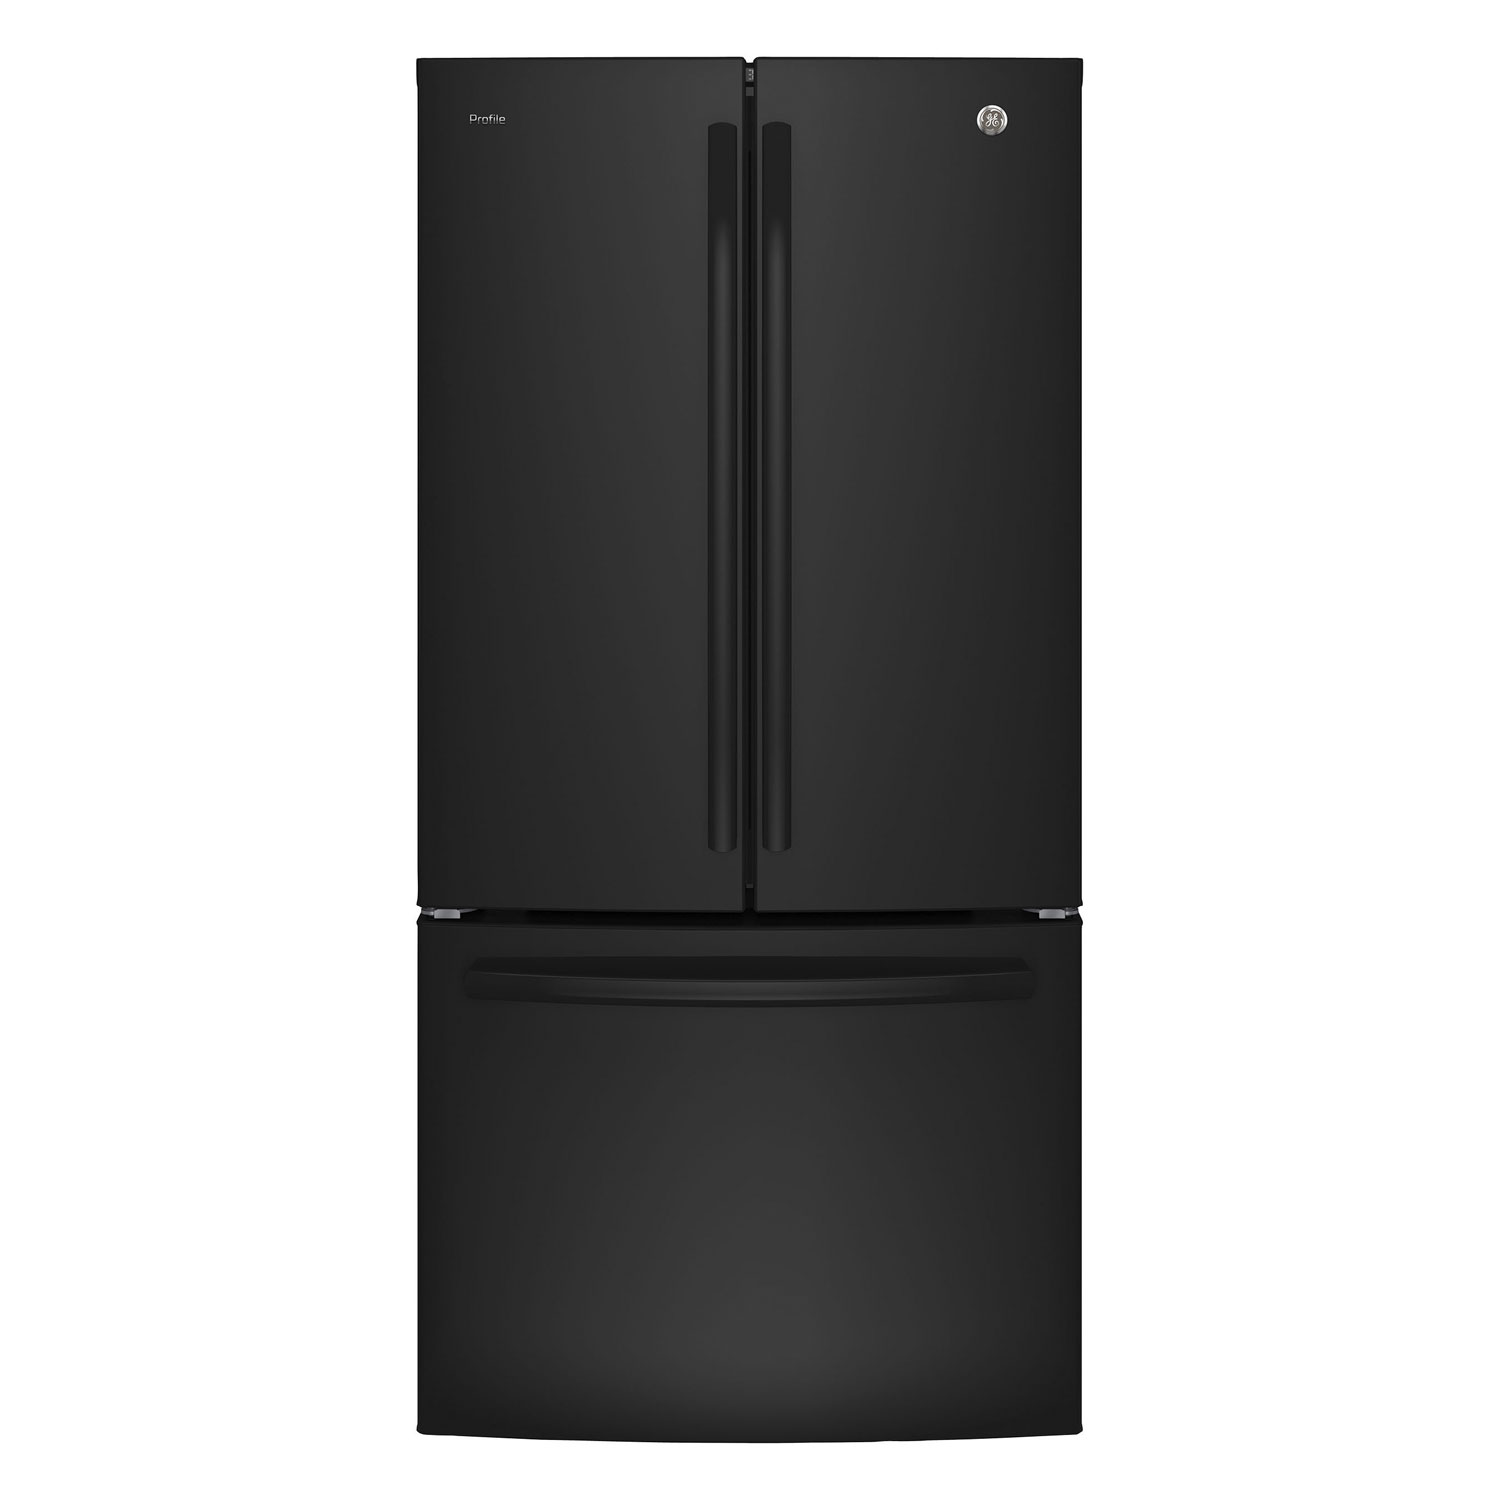 GE Profile 33" 24.8 Cu. Ft. French Door Refrigerator with Water & Ice Dispenser (PNE25NGLKBB)-Black